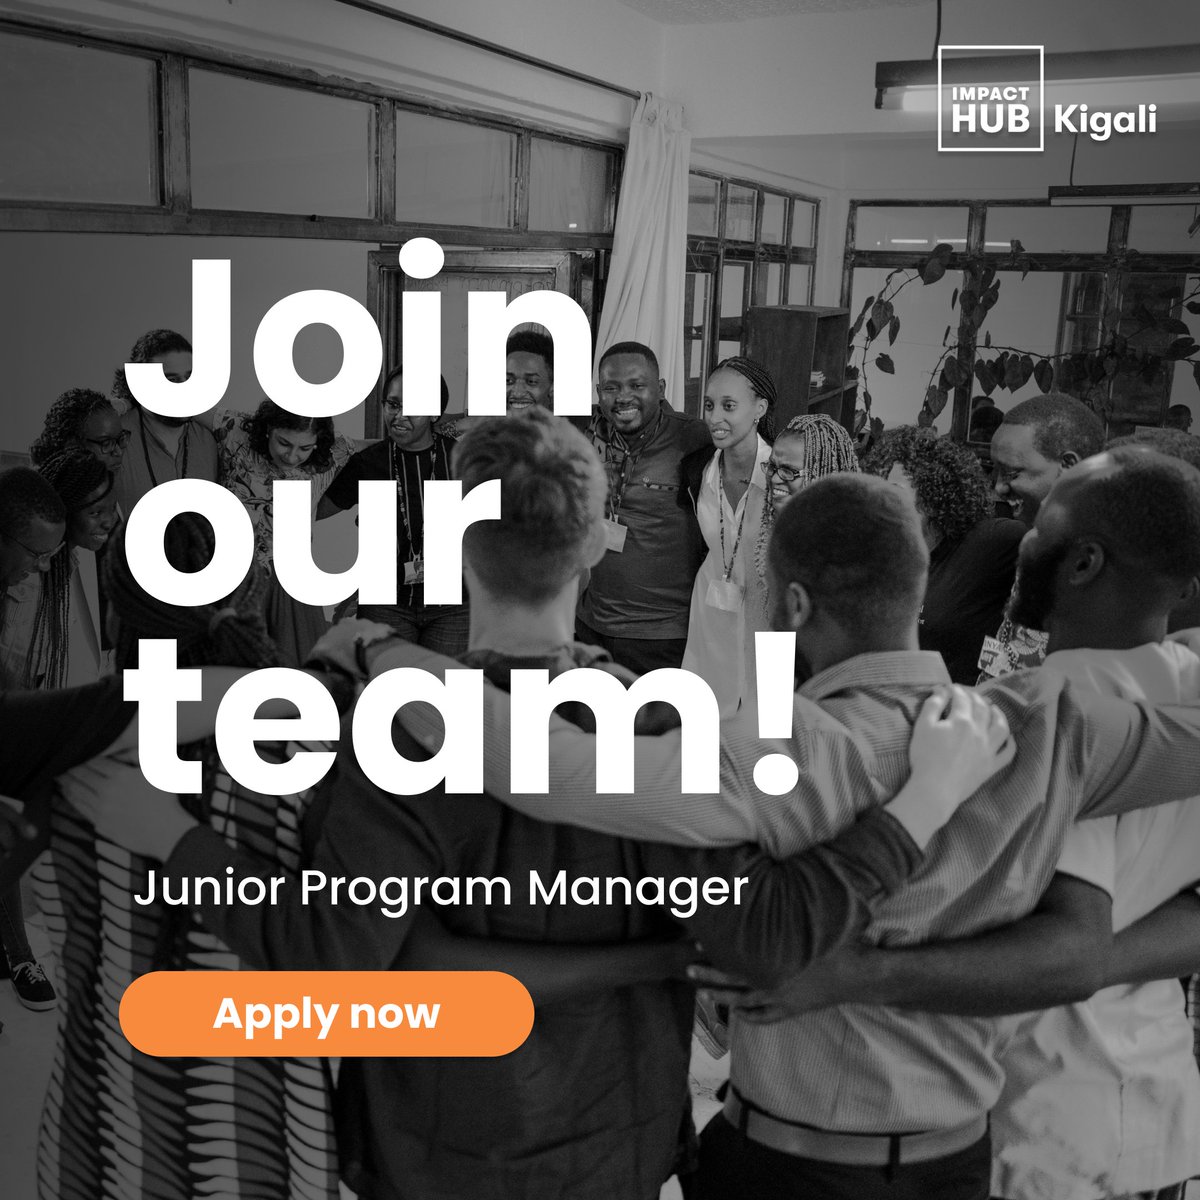 🚨 JOB ALERT! Join our dynamic team as a Junior Program Manager to support the implementation of our innovation programs and be part of the change.

Learn more and apply via this link bit.ly/ihkjpmanager

#ImpactHubKigali #MakeADifference